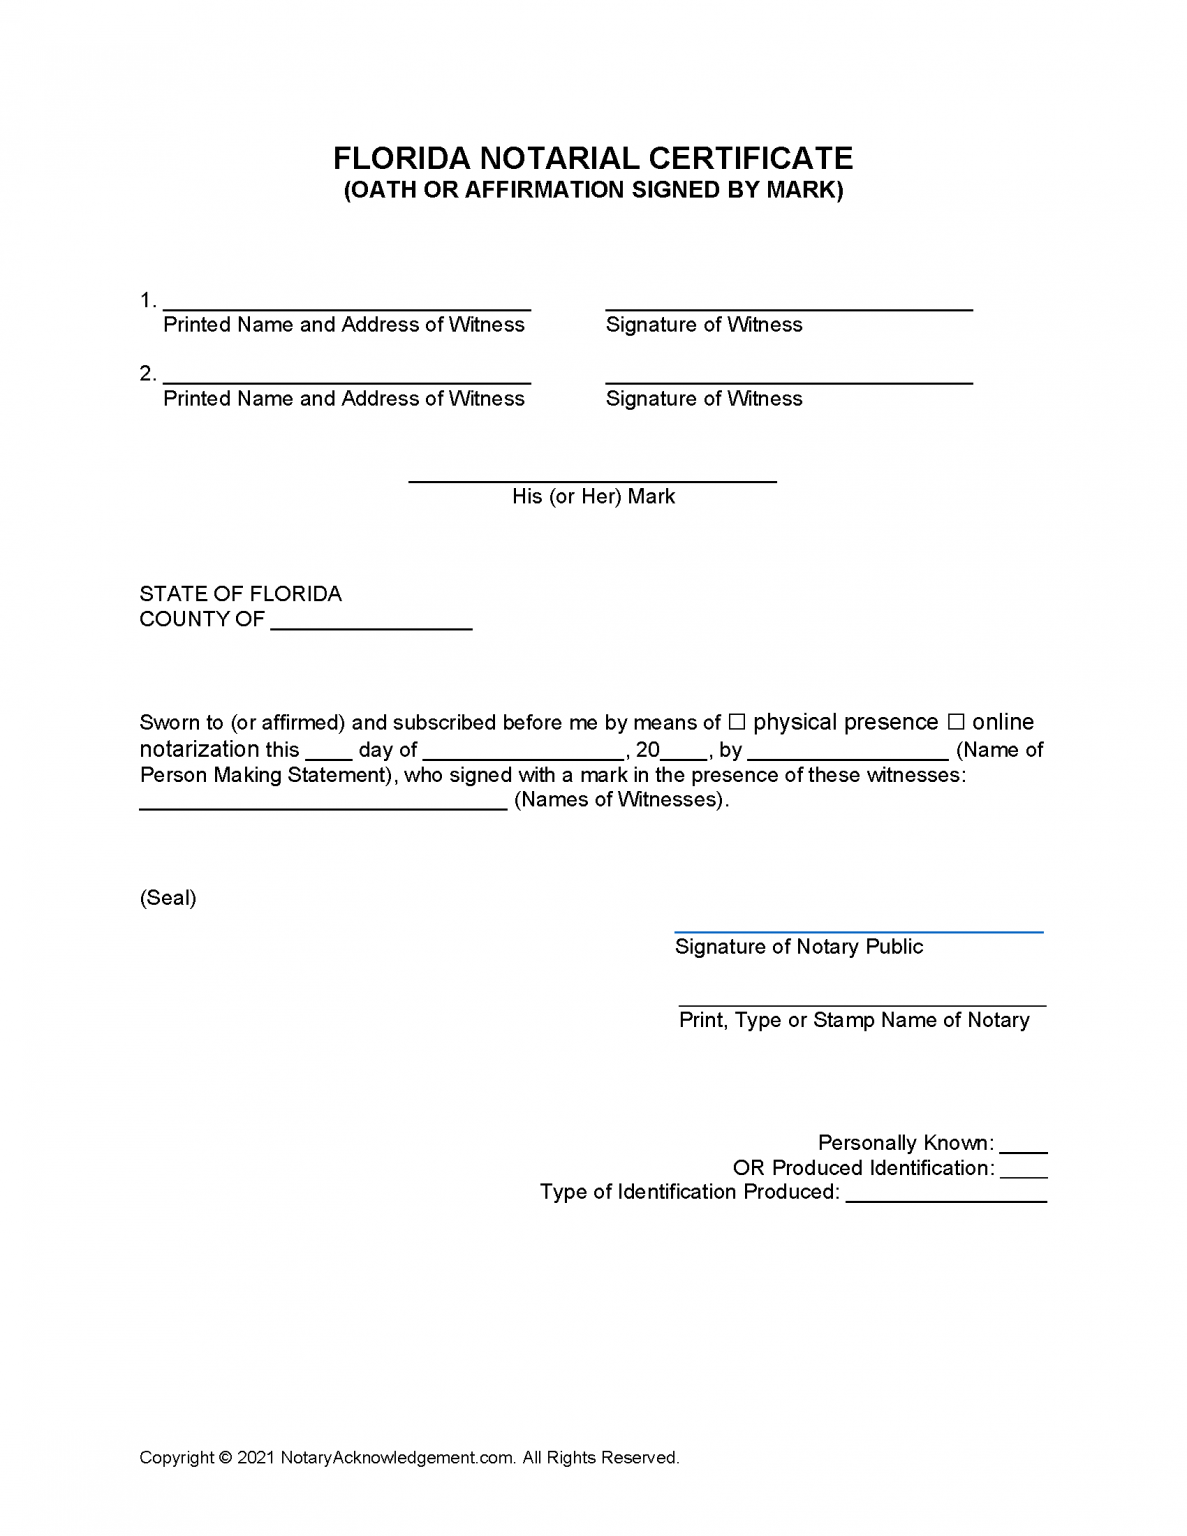 free-florida-notarial-certificate-oath-or-affirmation-signed-by-mark